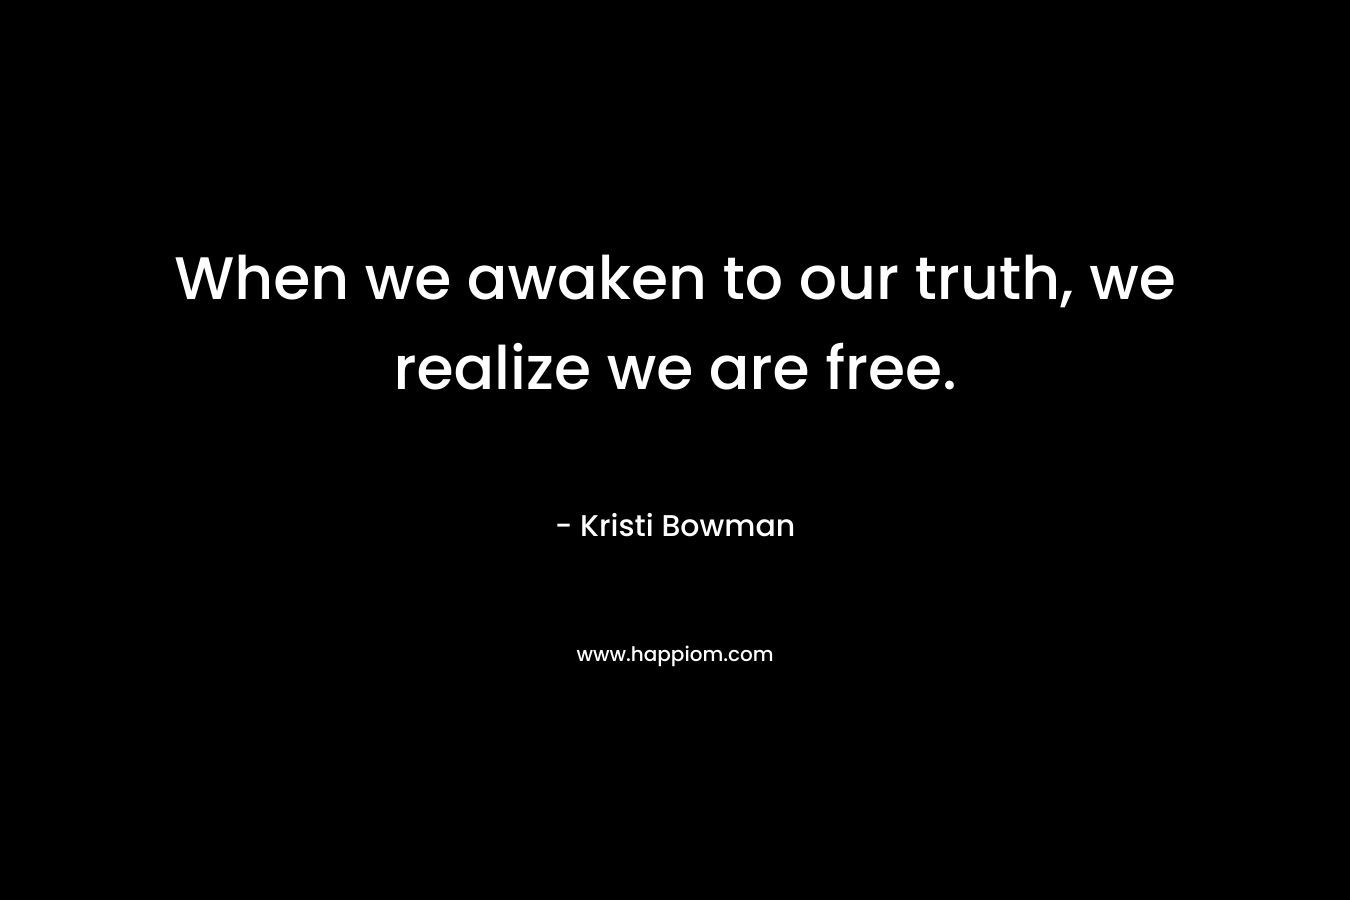 When we awaken to our truth, we realize we are free. – Kristi Bowman